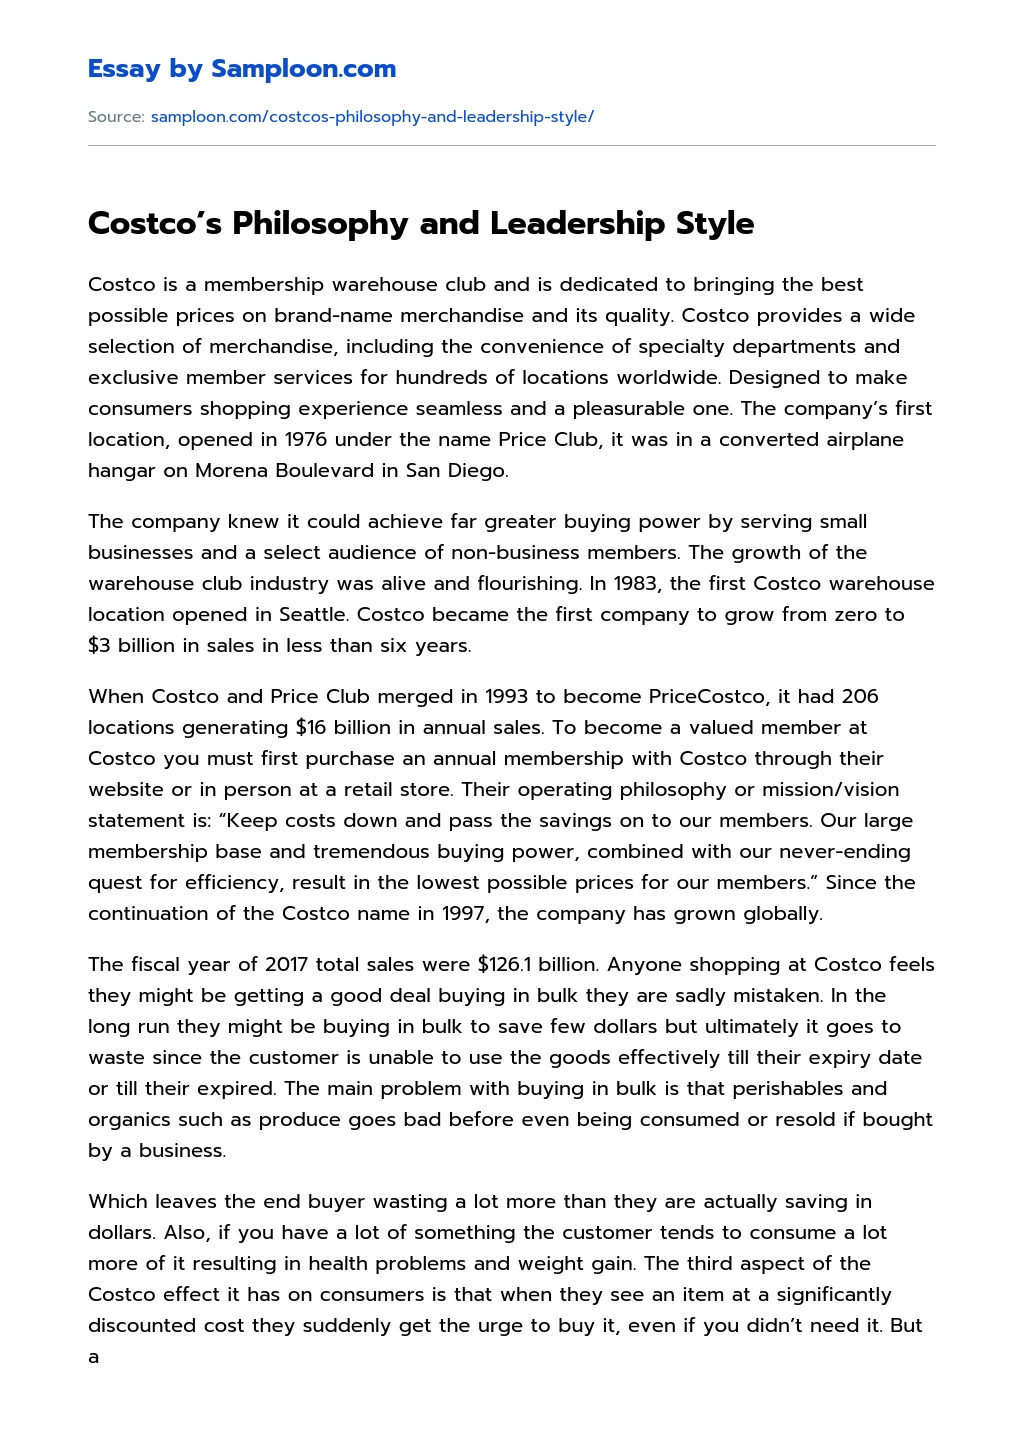 Costco’s Philosophy and Leadership Style essay